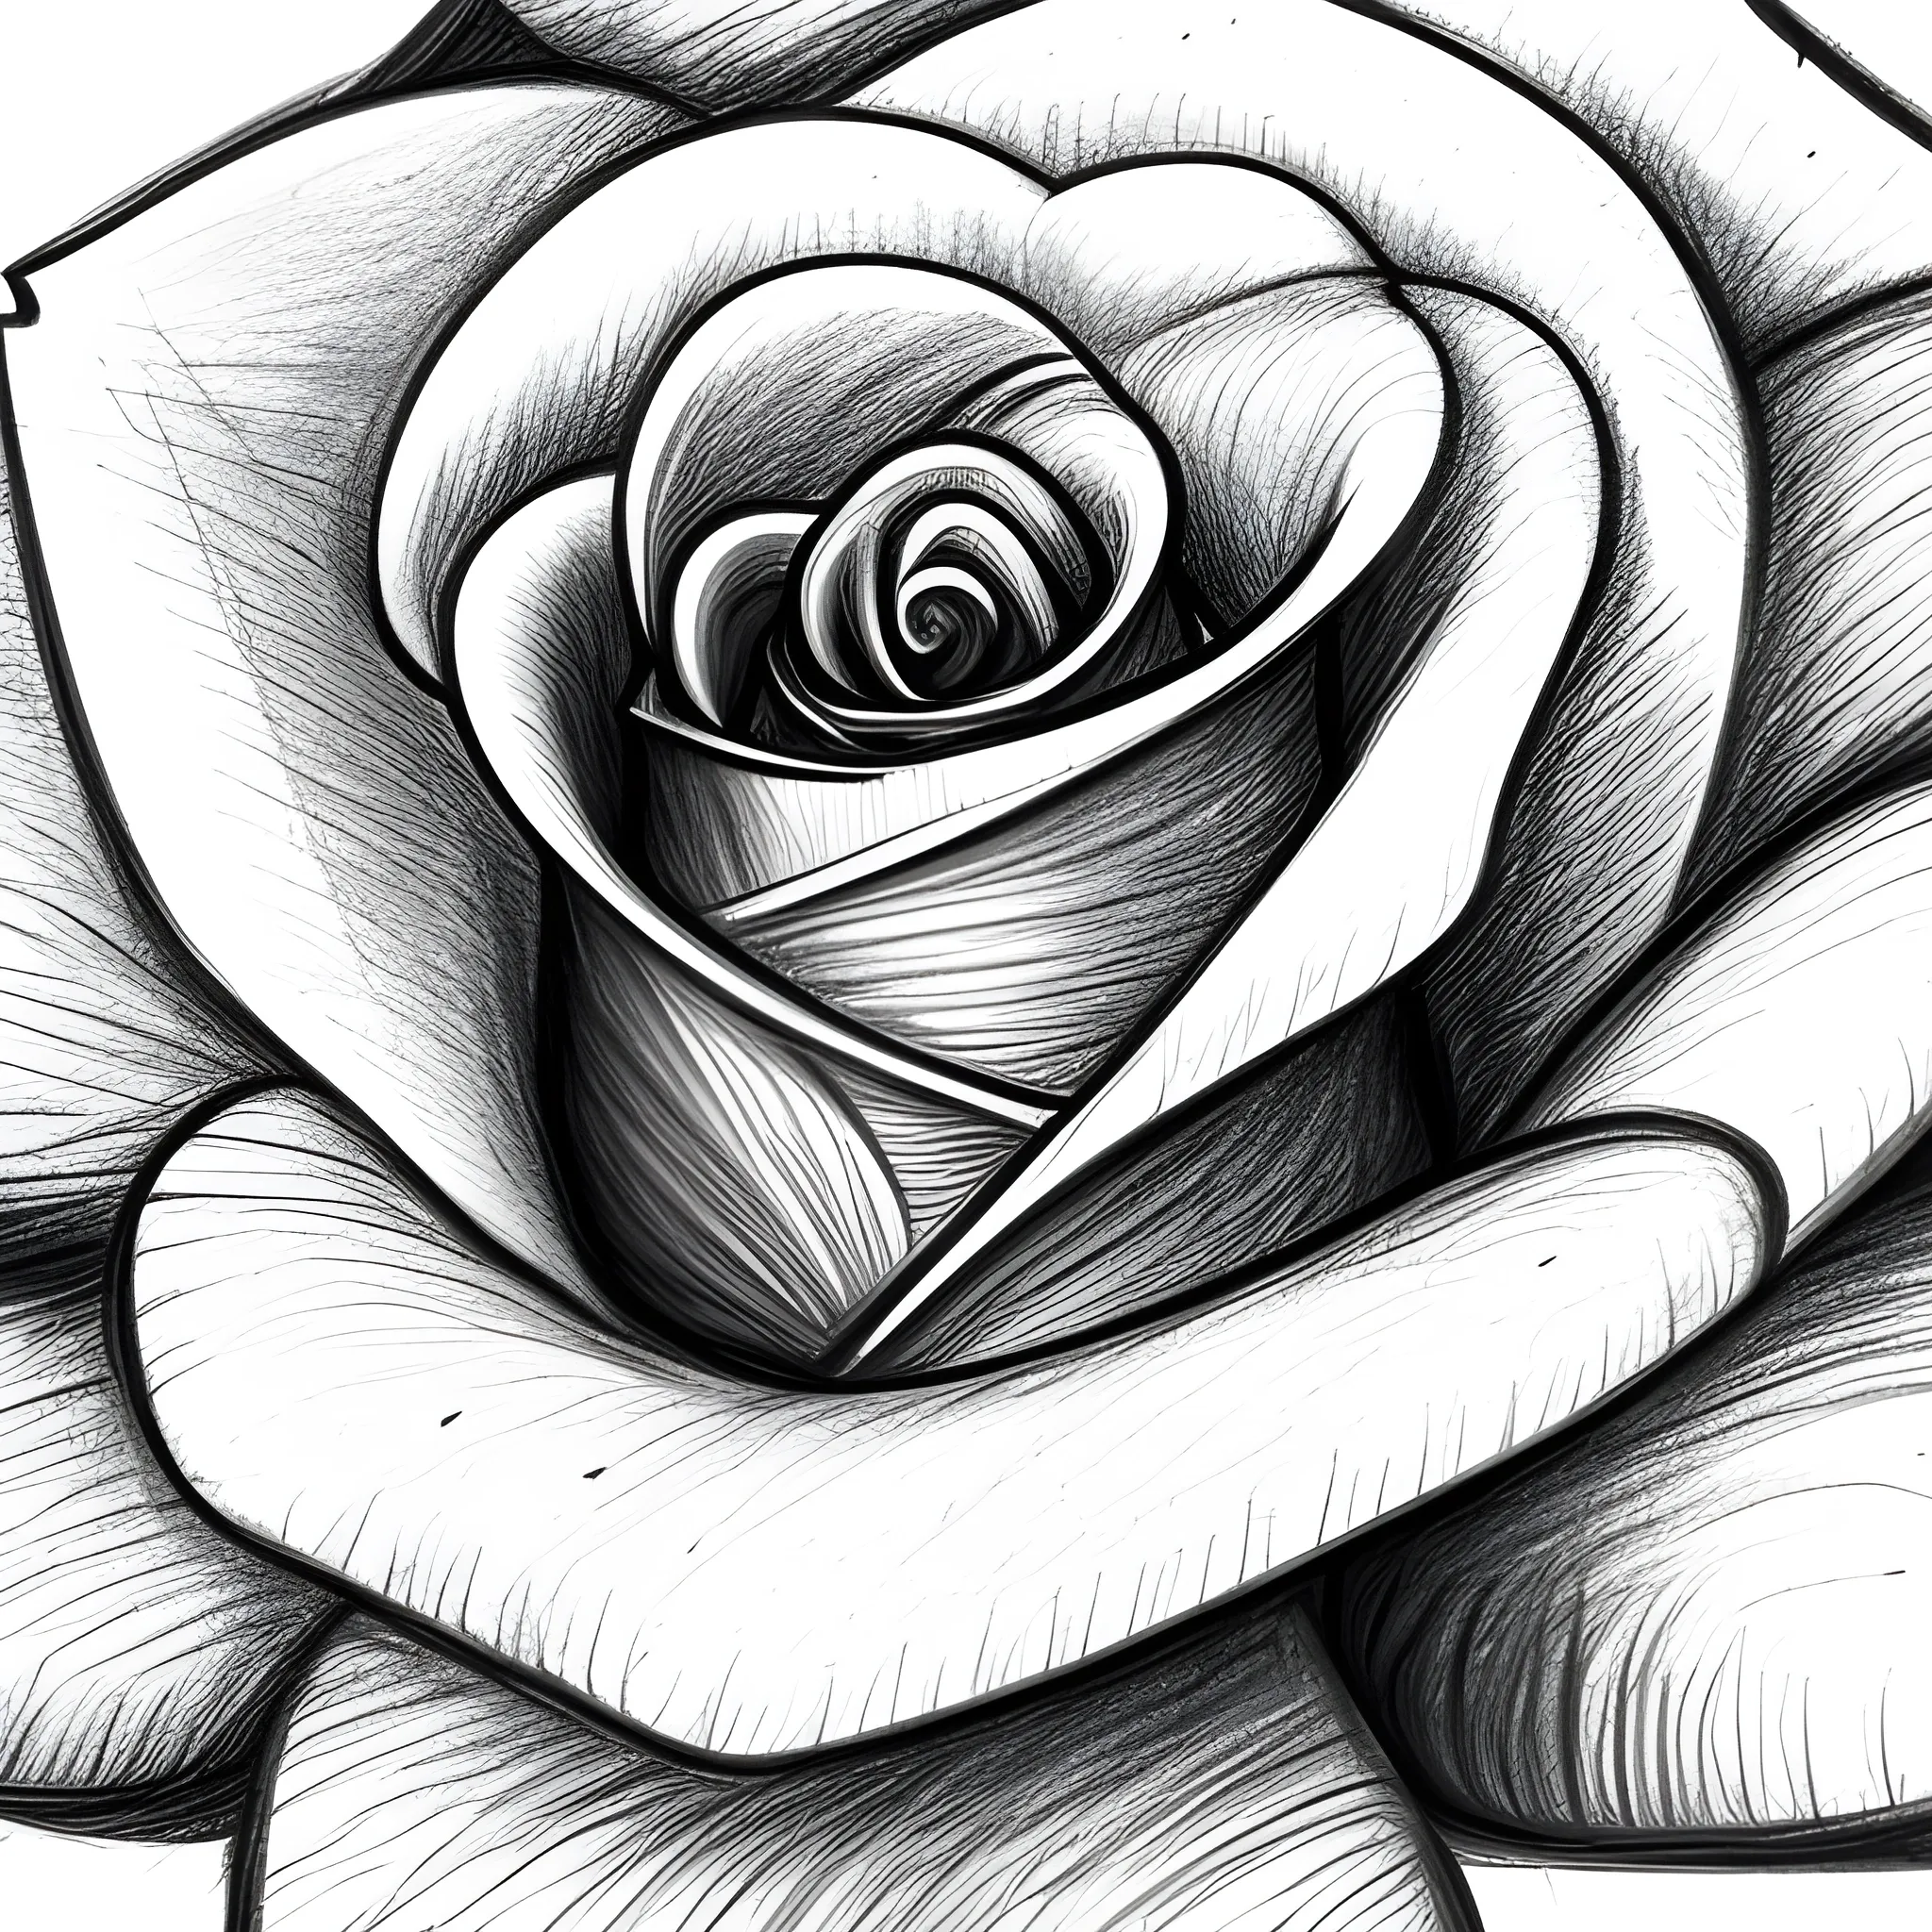 How to draw rose step by step: Realistic rose drawing easy with pencil